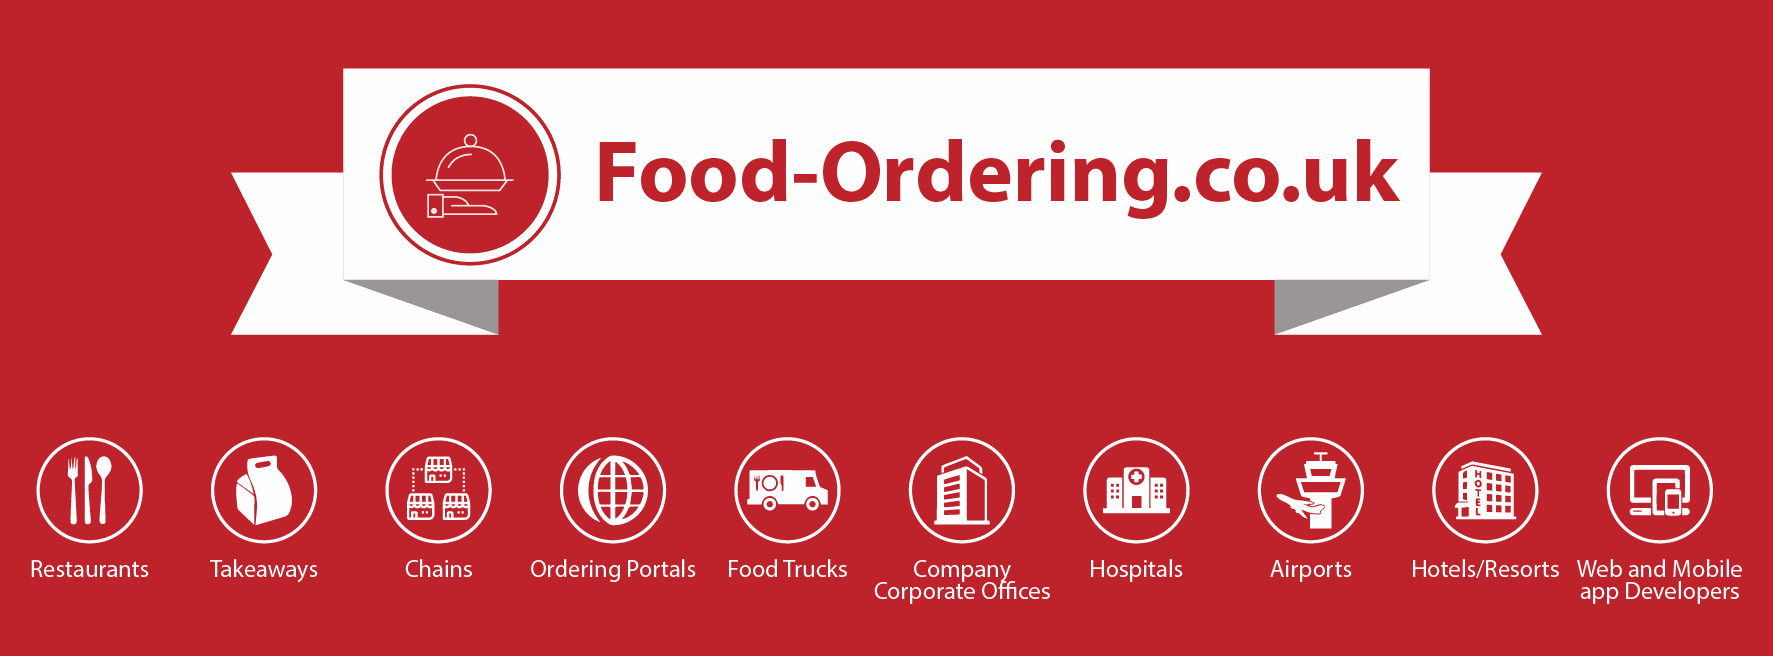 multilingual multi-use online ordering system
